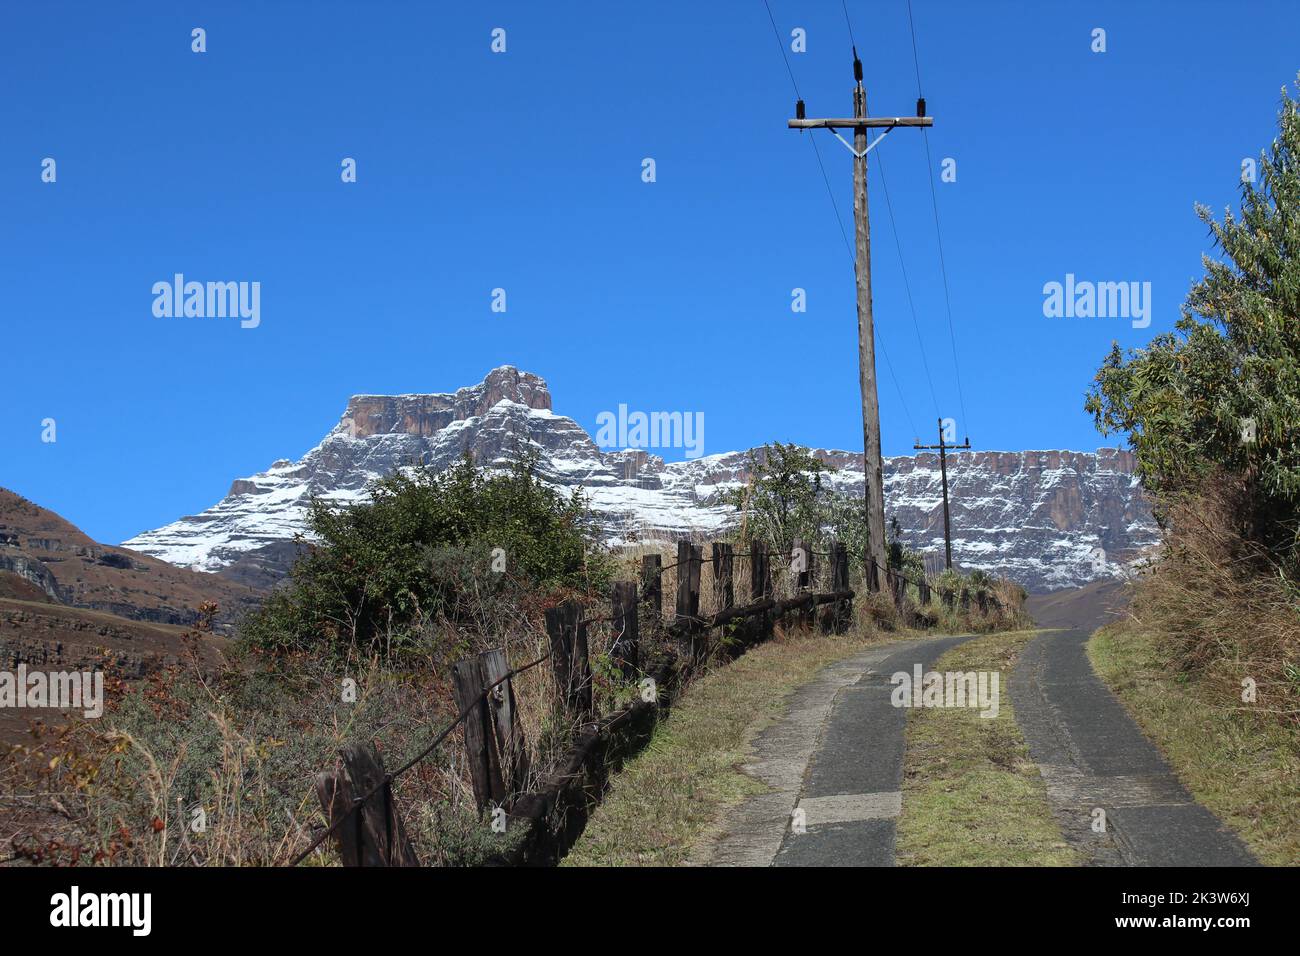 Winding path through the snow-capped mountains of the Drakensberg, South Africa Stock Photo